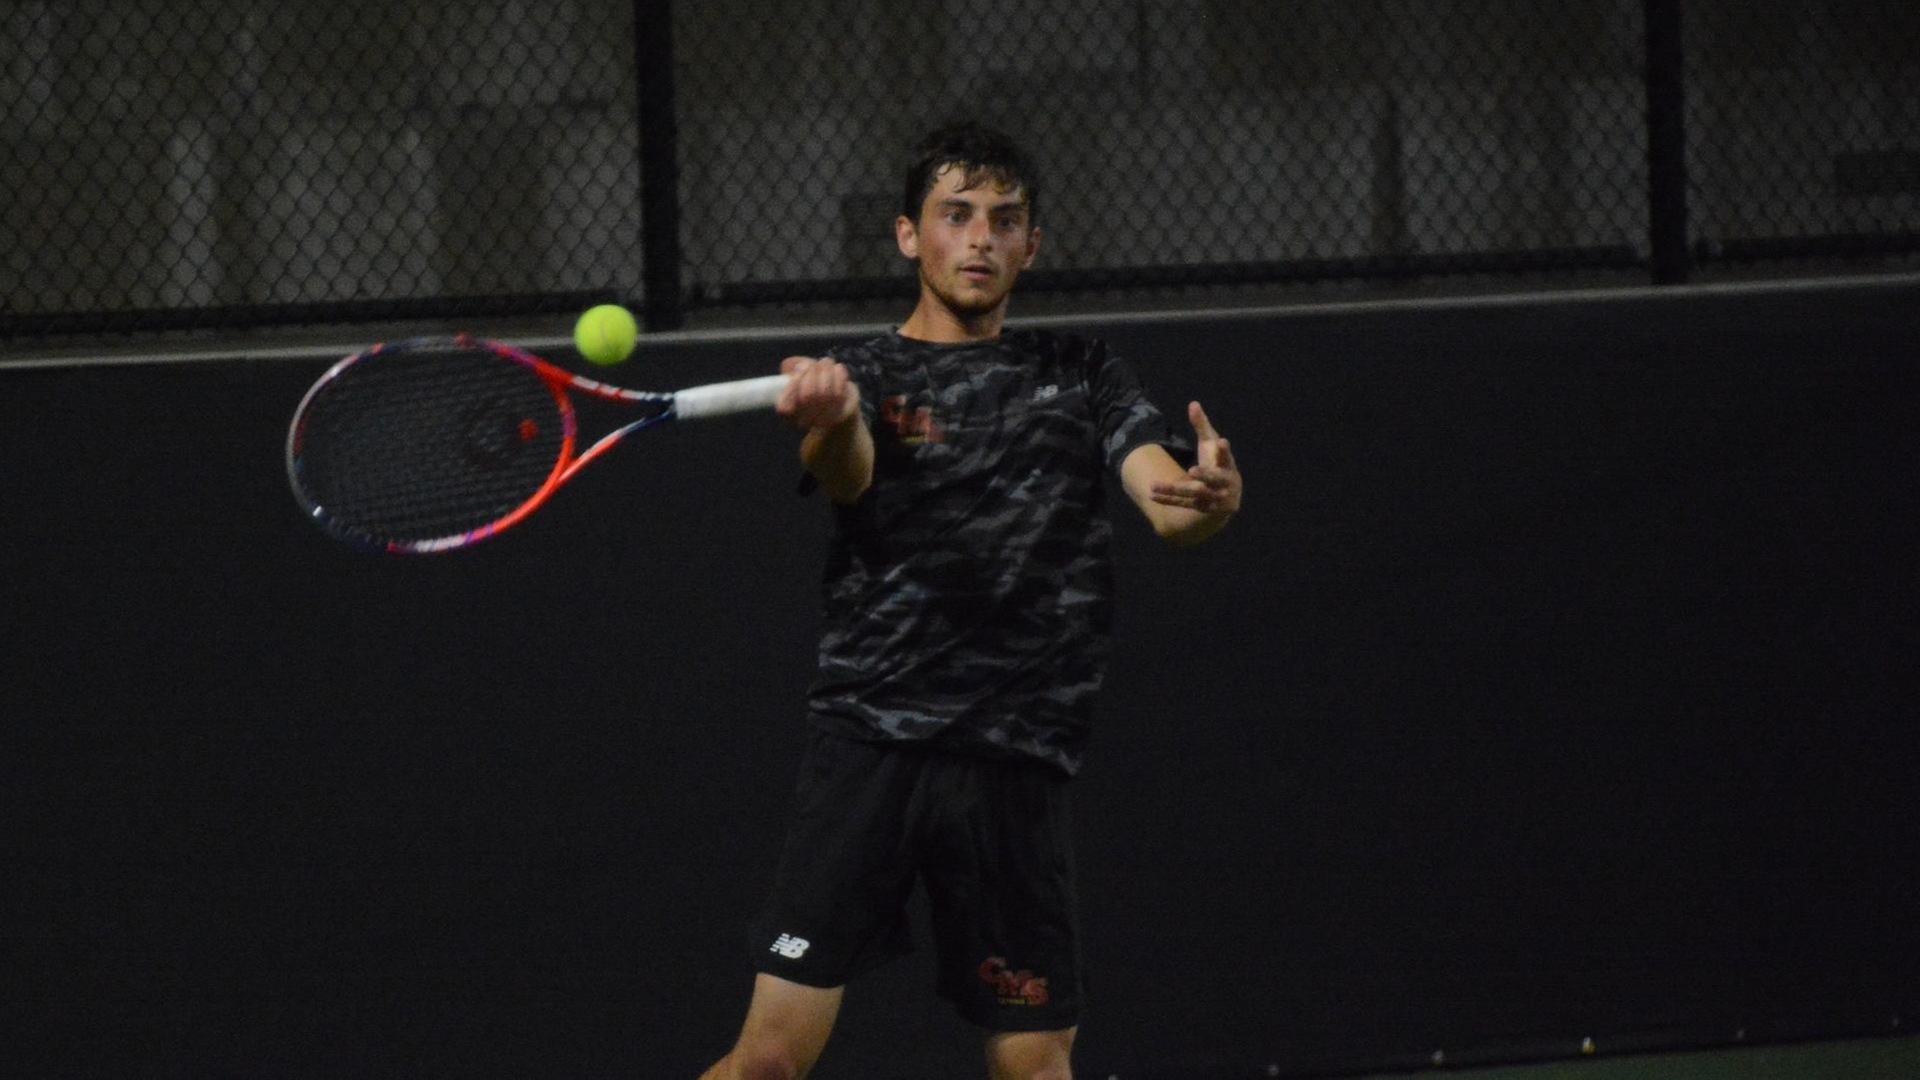 Jack Katzman gave CMS a 4-3 lead with a win at No. 2 singles